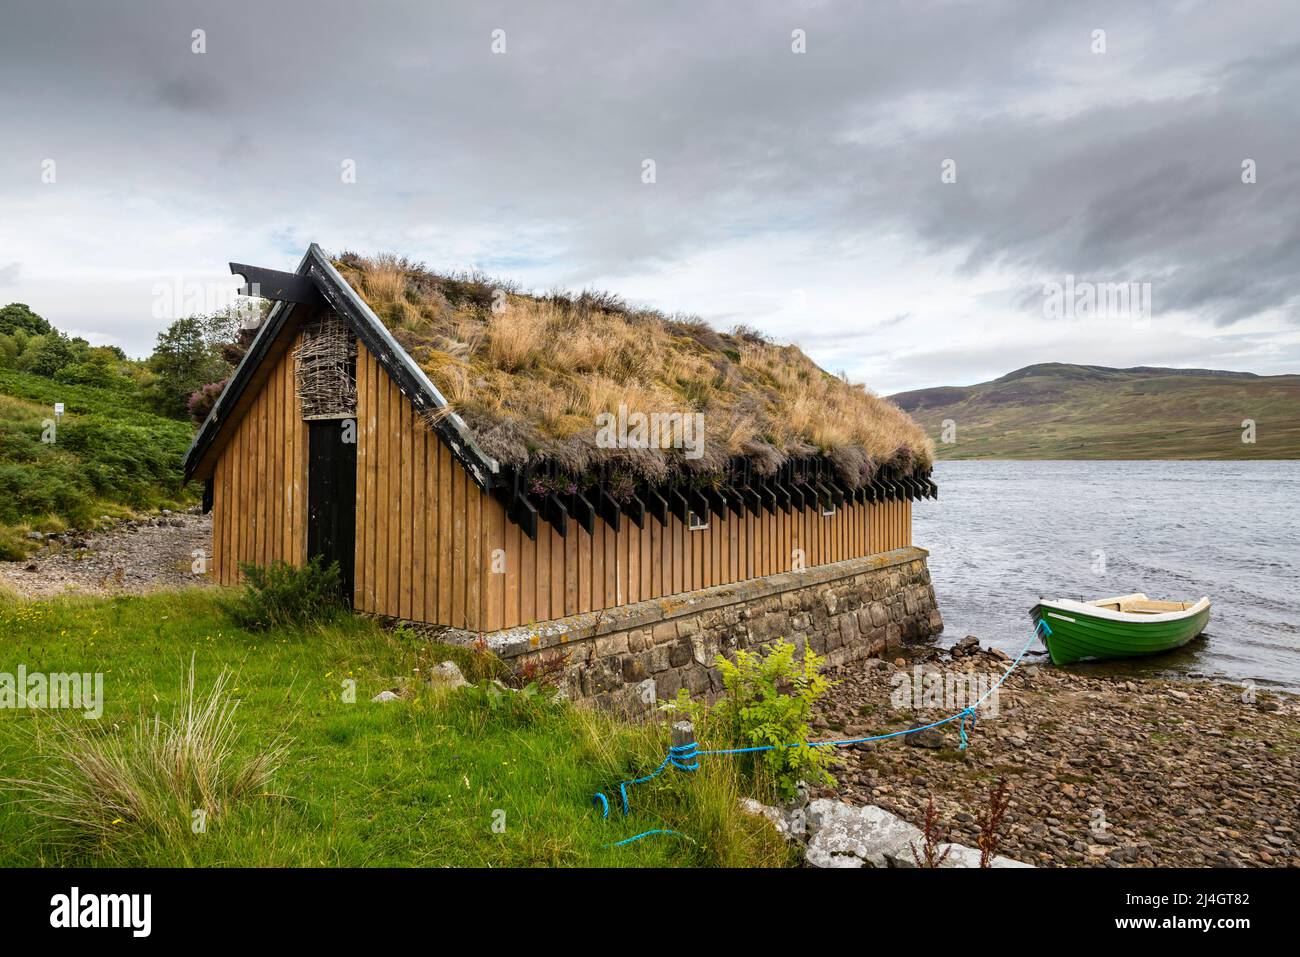 A wooden boathouse with a turf roof beside Loch Loyal on a cloudy day. Stock Photo